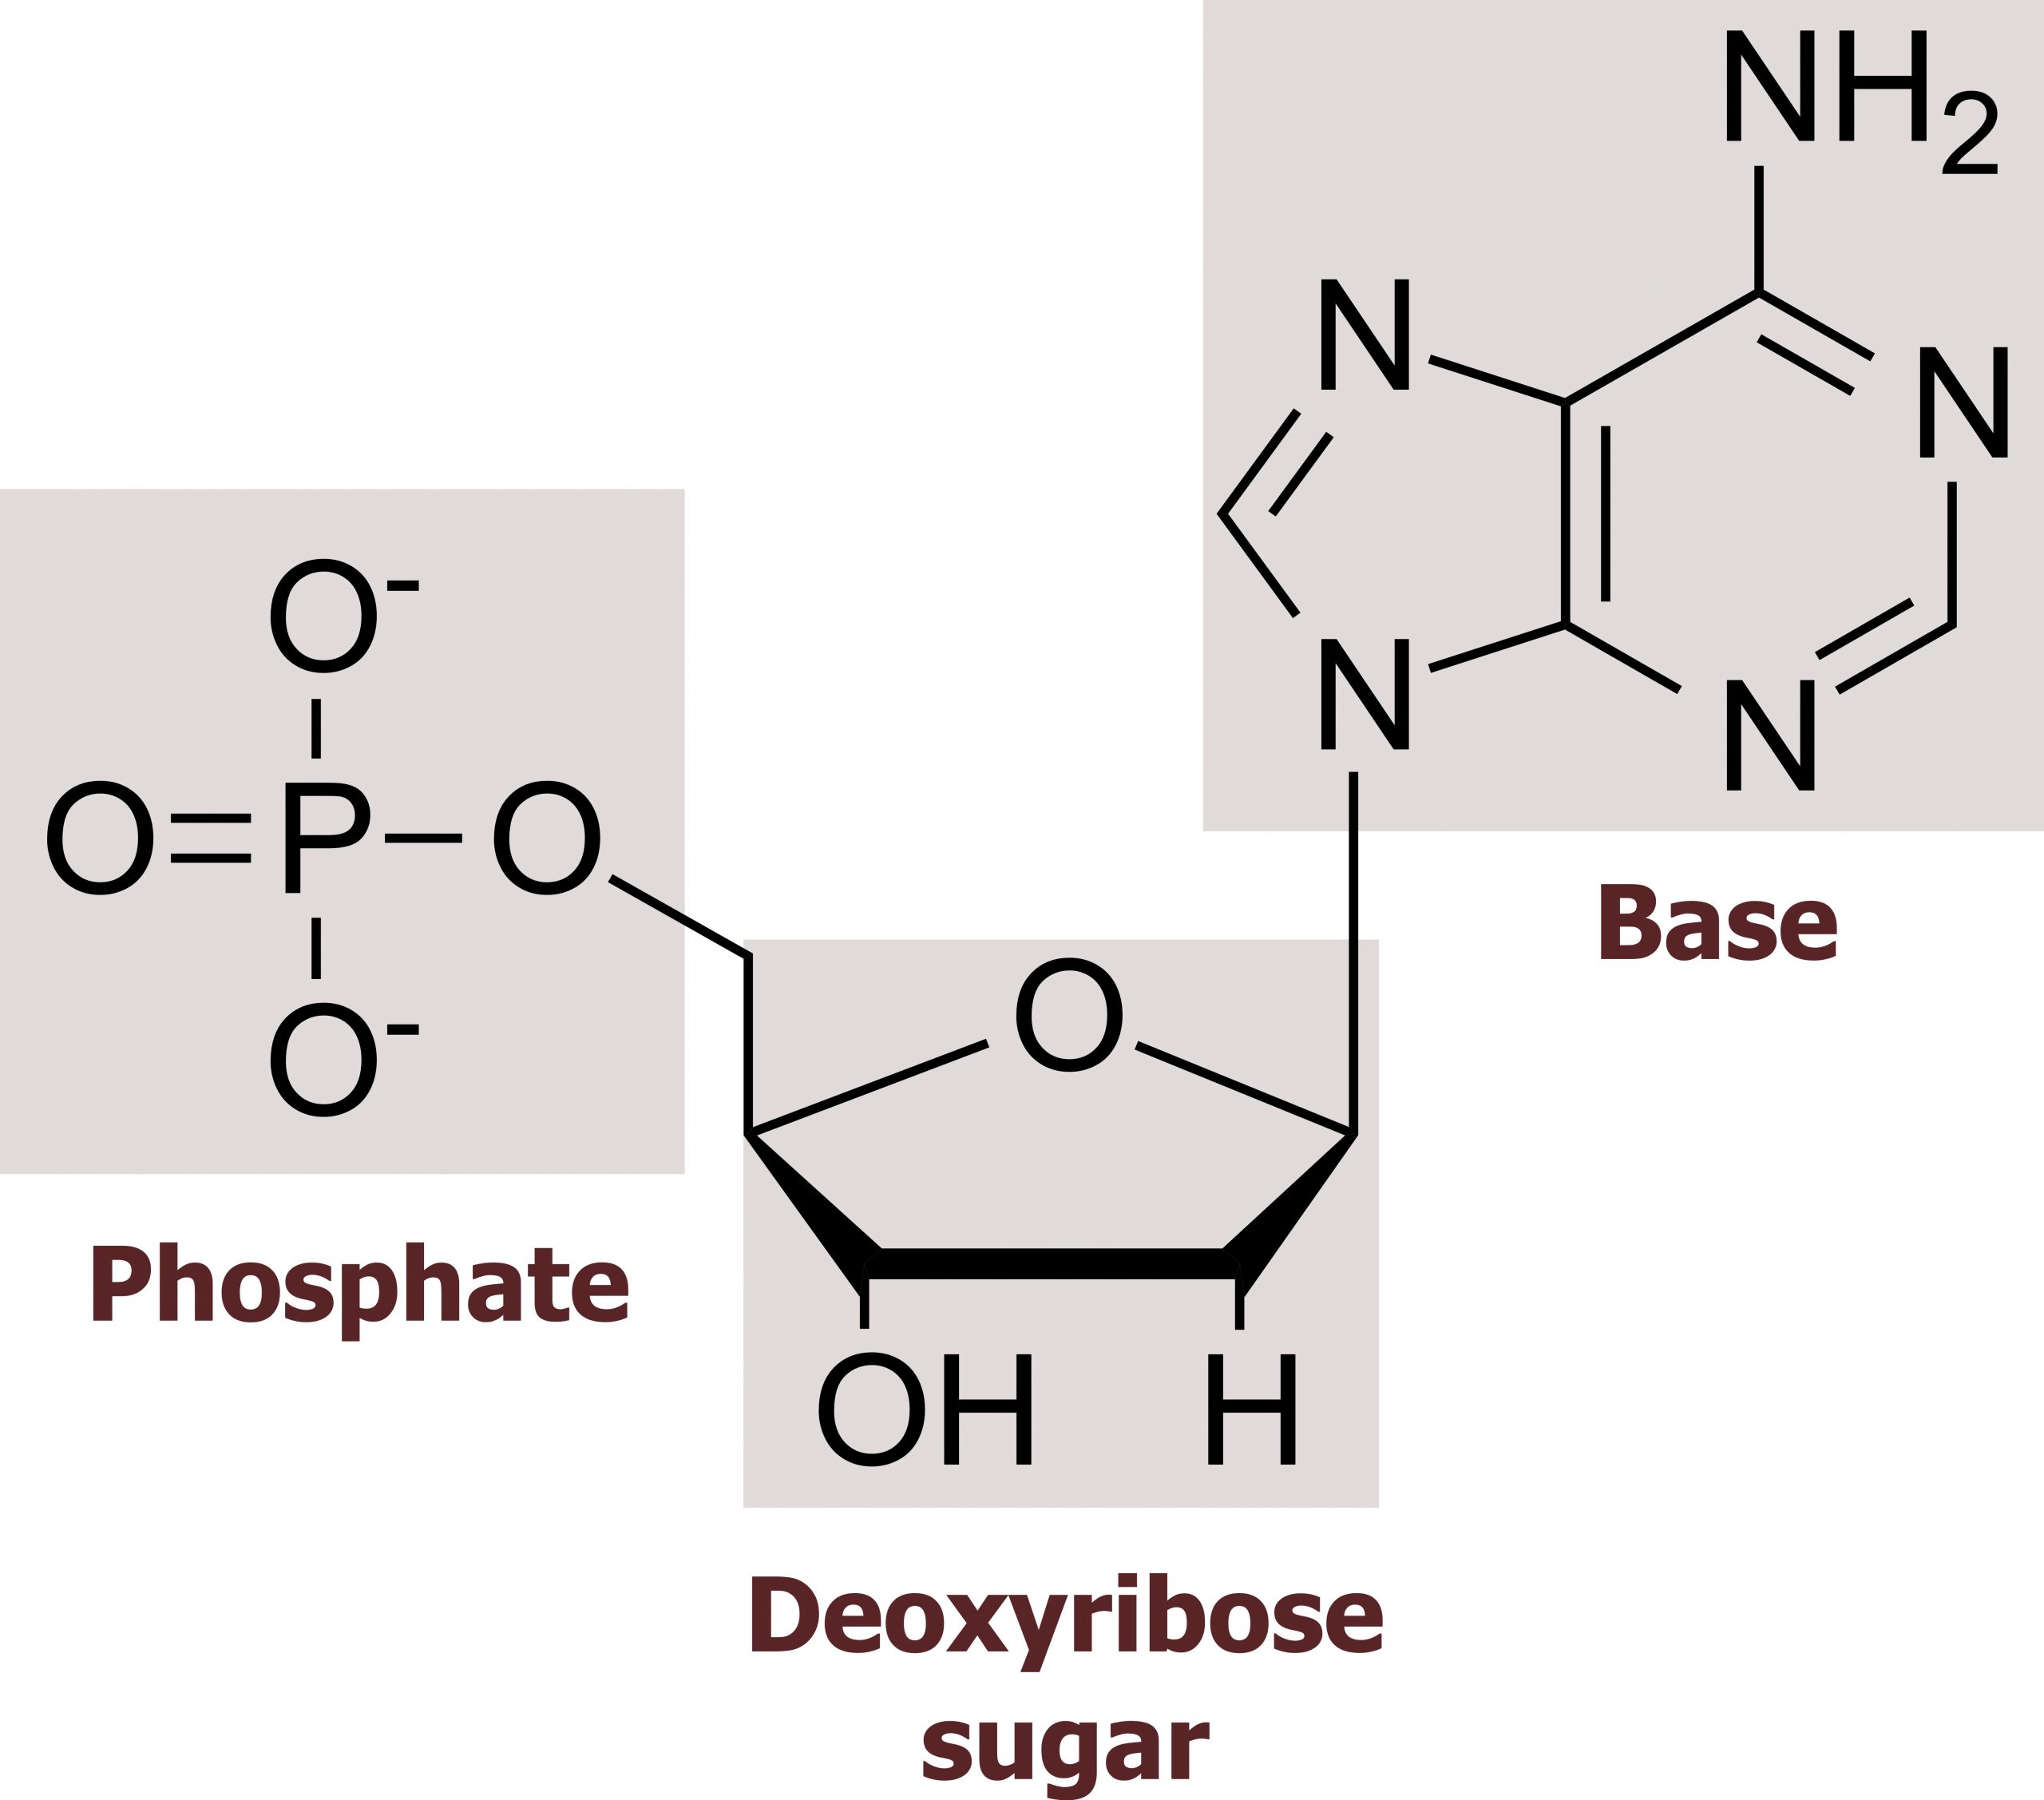 Deoxyribose sugar: Pentagon shaped 5-carbon sugar with oxygen at top, 1’ bond to base, 2’ bond to H, 3’ bond to OH, 4’ bond to phosphate group. Phosphate group: Central phosphorus atom double bonded to O, single bonded to 2 O’s, and single bonded to O bonded to deoxyribose sugar. Bases described in figure 7.5.